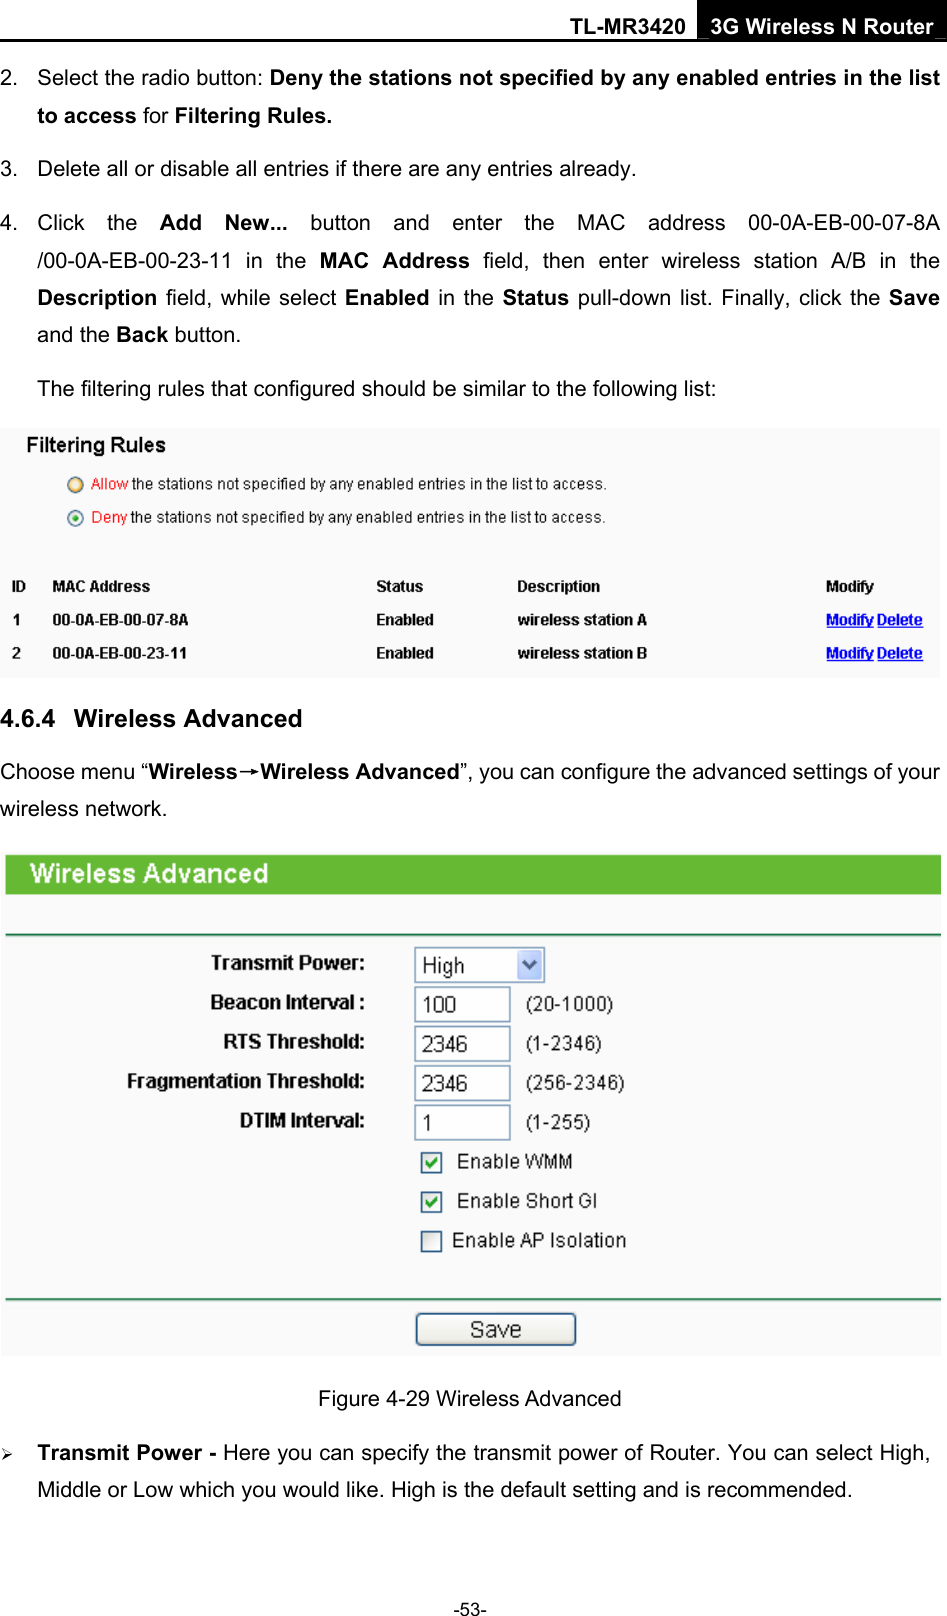 TL-MR3420 3G Wireless N Router -53- 2.  Select the radio button: Deny the stations not specified by any enabled entries in the list to access for Filtering Rules. 3.  Delete all or disable all entries if there are any entries already. 4. Click  the  Add New... button and enter the MAC address 00-0A-EB-00-07-8A /00-0A-EB-00-23-11 in the MAC Address field, then enter wireless station A/B in the Description field, while select Enabled in the Status pull-down list. Finally, click the Save and the Back button. The filtering rules that configured should be similar to the following list:    4.6.4  Wireless Advanced Choose menu “Wireless→Wireless Advanced”, you can configure the advanced settings of your wireless network.  Figure 4-29 Wireless Advanced ¾ Transmit Power - Here you can specify the transmit power of Router. You can select High, Middle or Low which you would like. High is the default setting and is recommended. 